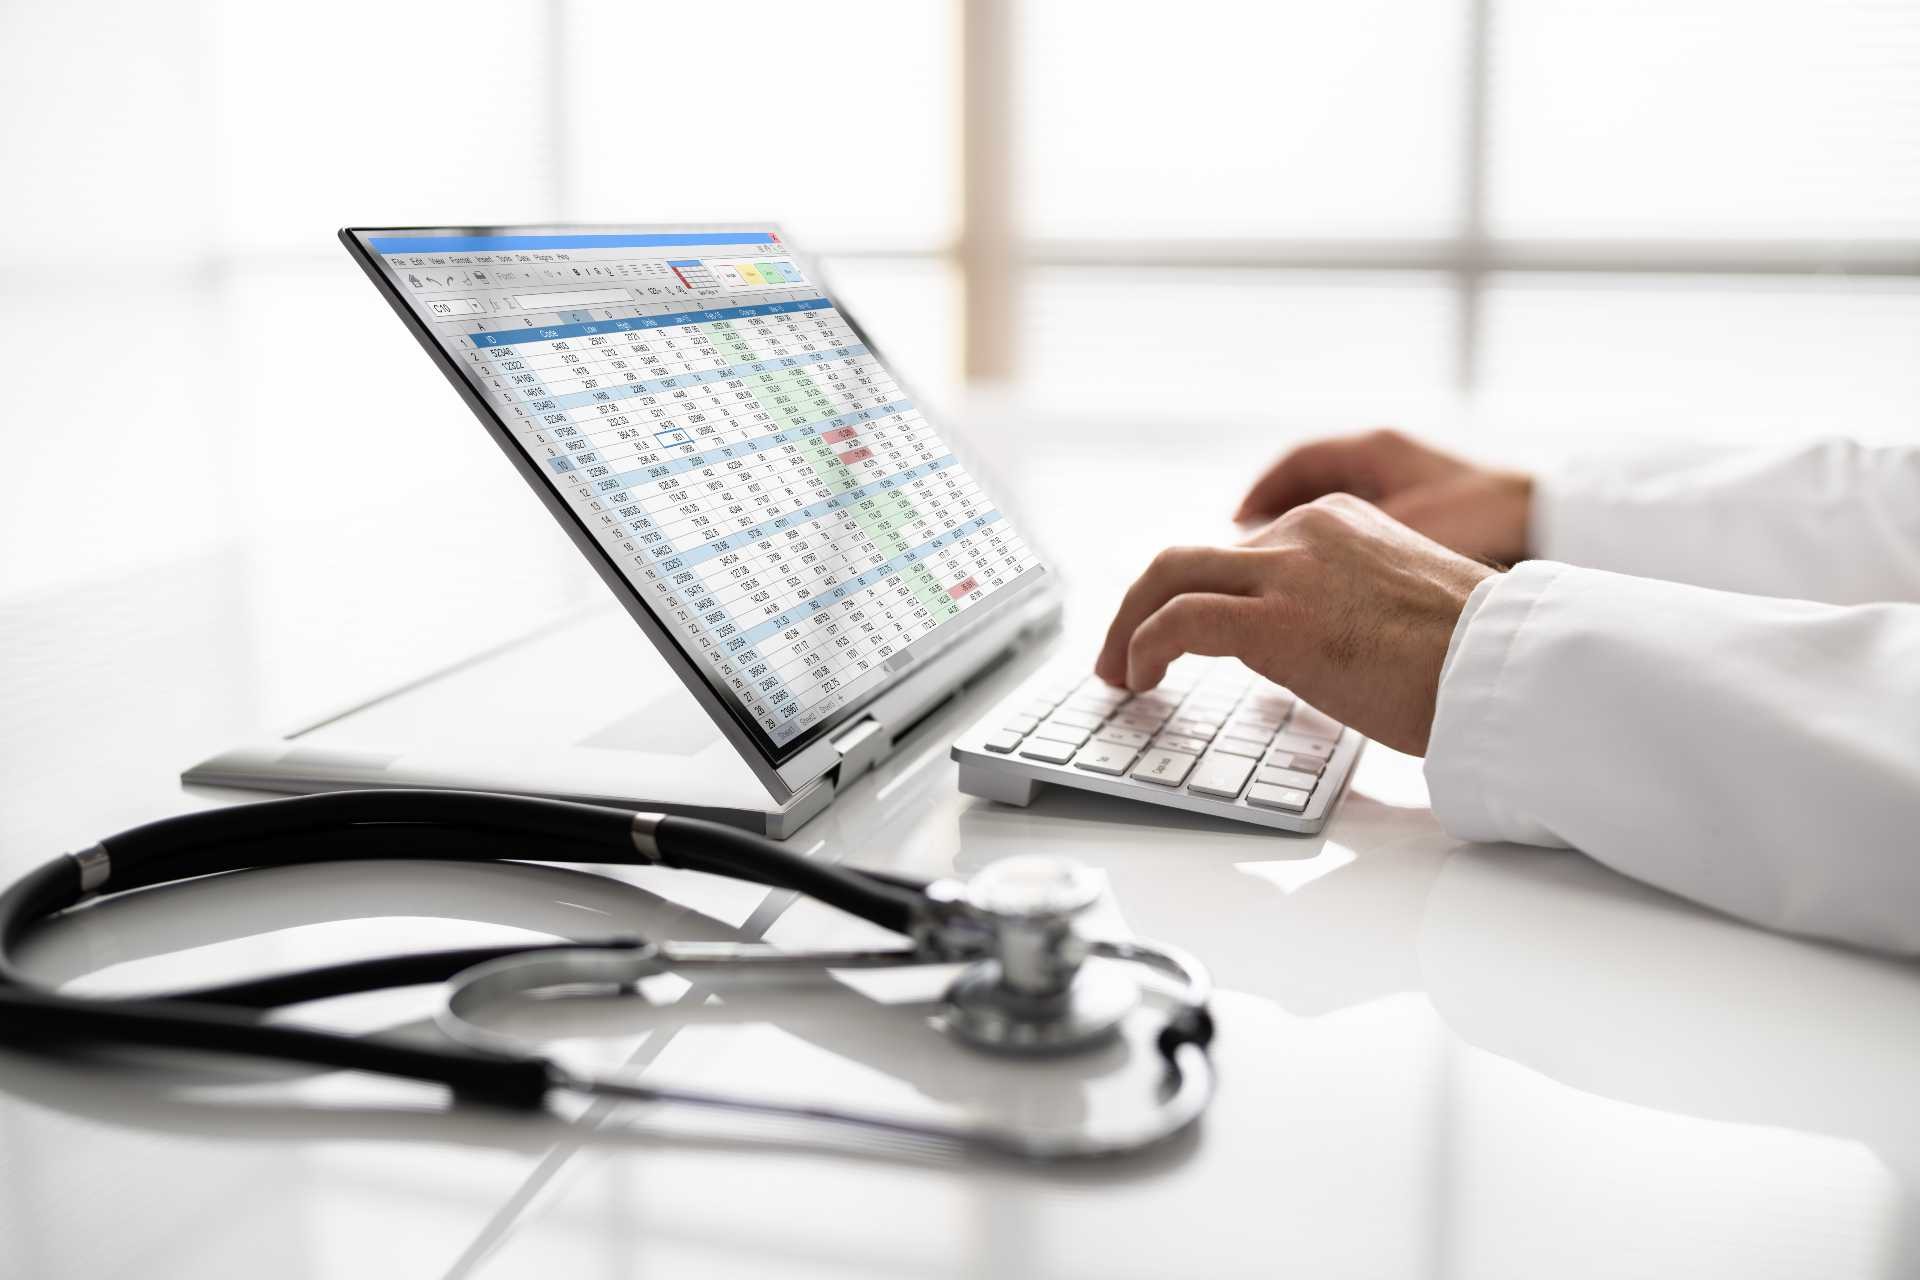 Nearly 400 New Diagnosis Codes Coming This Fall, CMS Announces